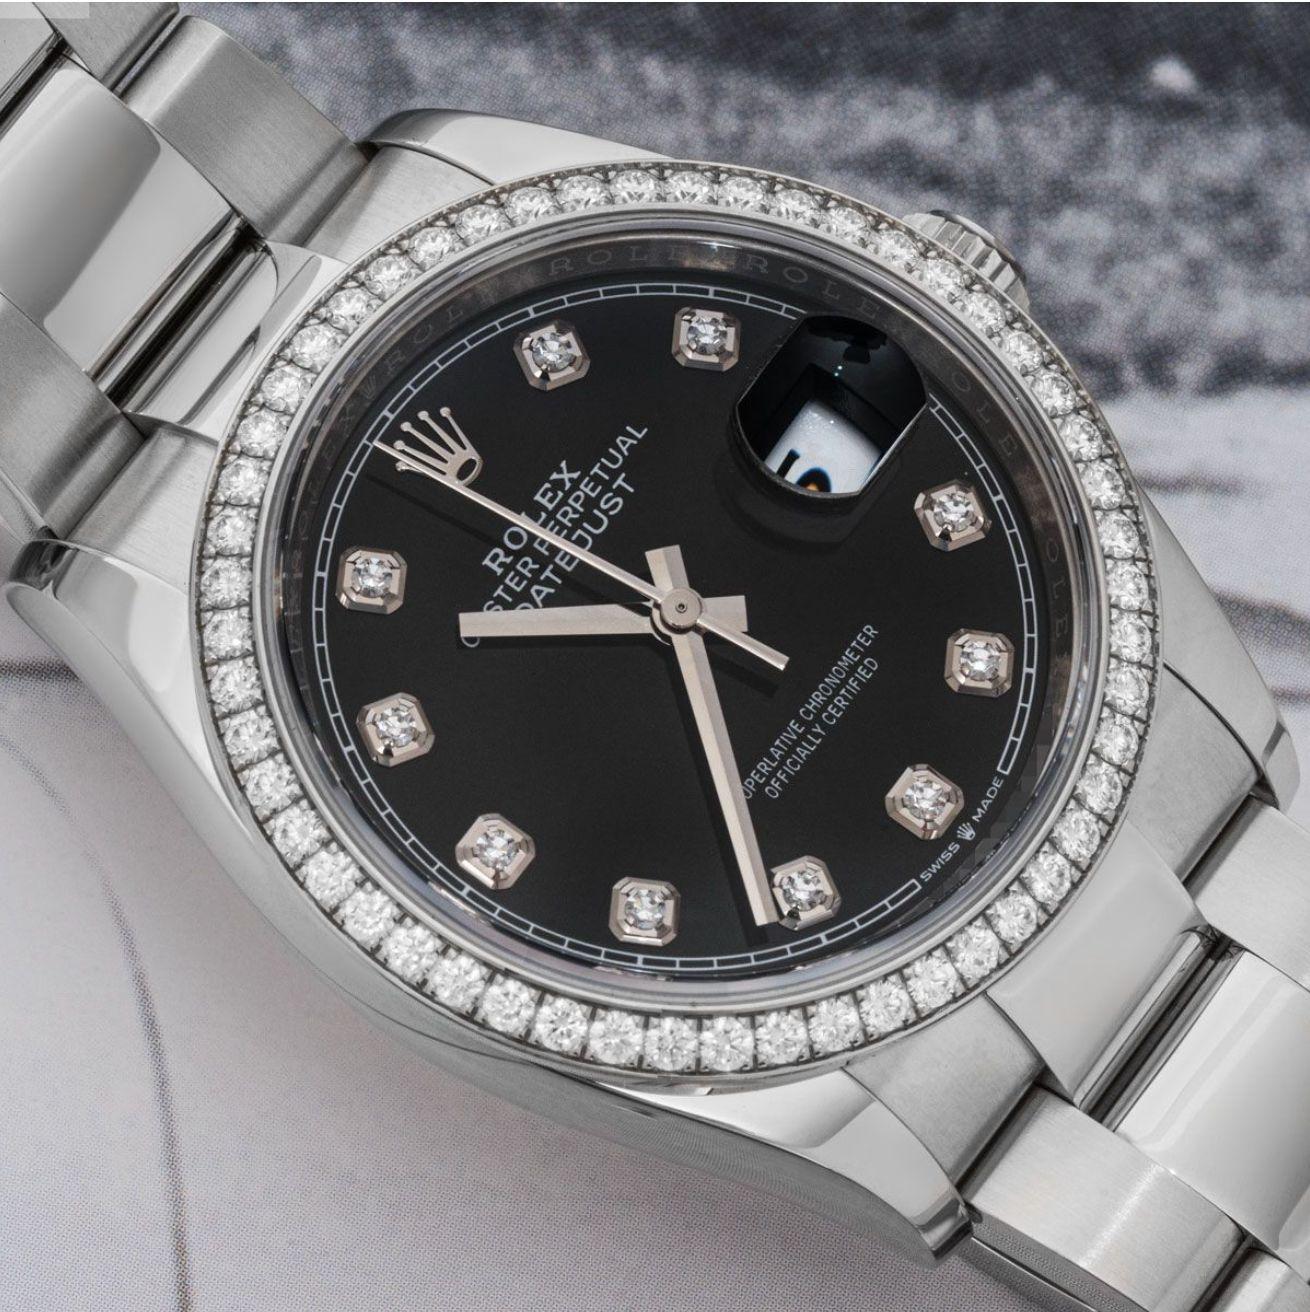 A 36mm Datejust in Oystersteel by Rolex. Featuring a black dial with diamond set hour marker and a fixed bezel set with 52 round brilliant cut diamonds. Fitted with a scratch-resistant sapphire crystal and a self-winding automatic movement. The